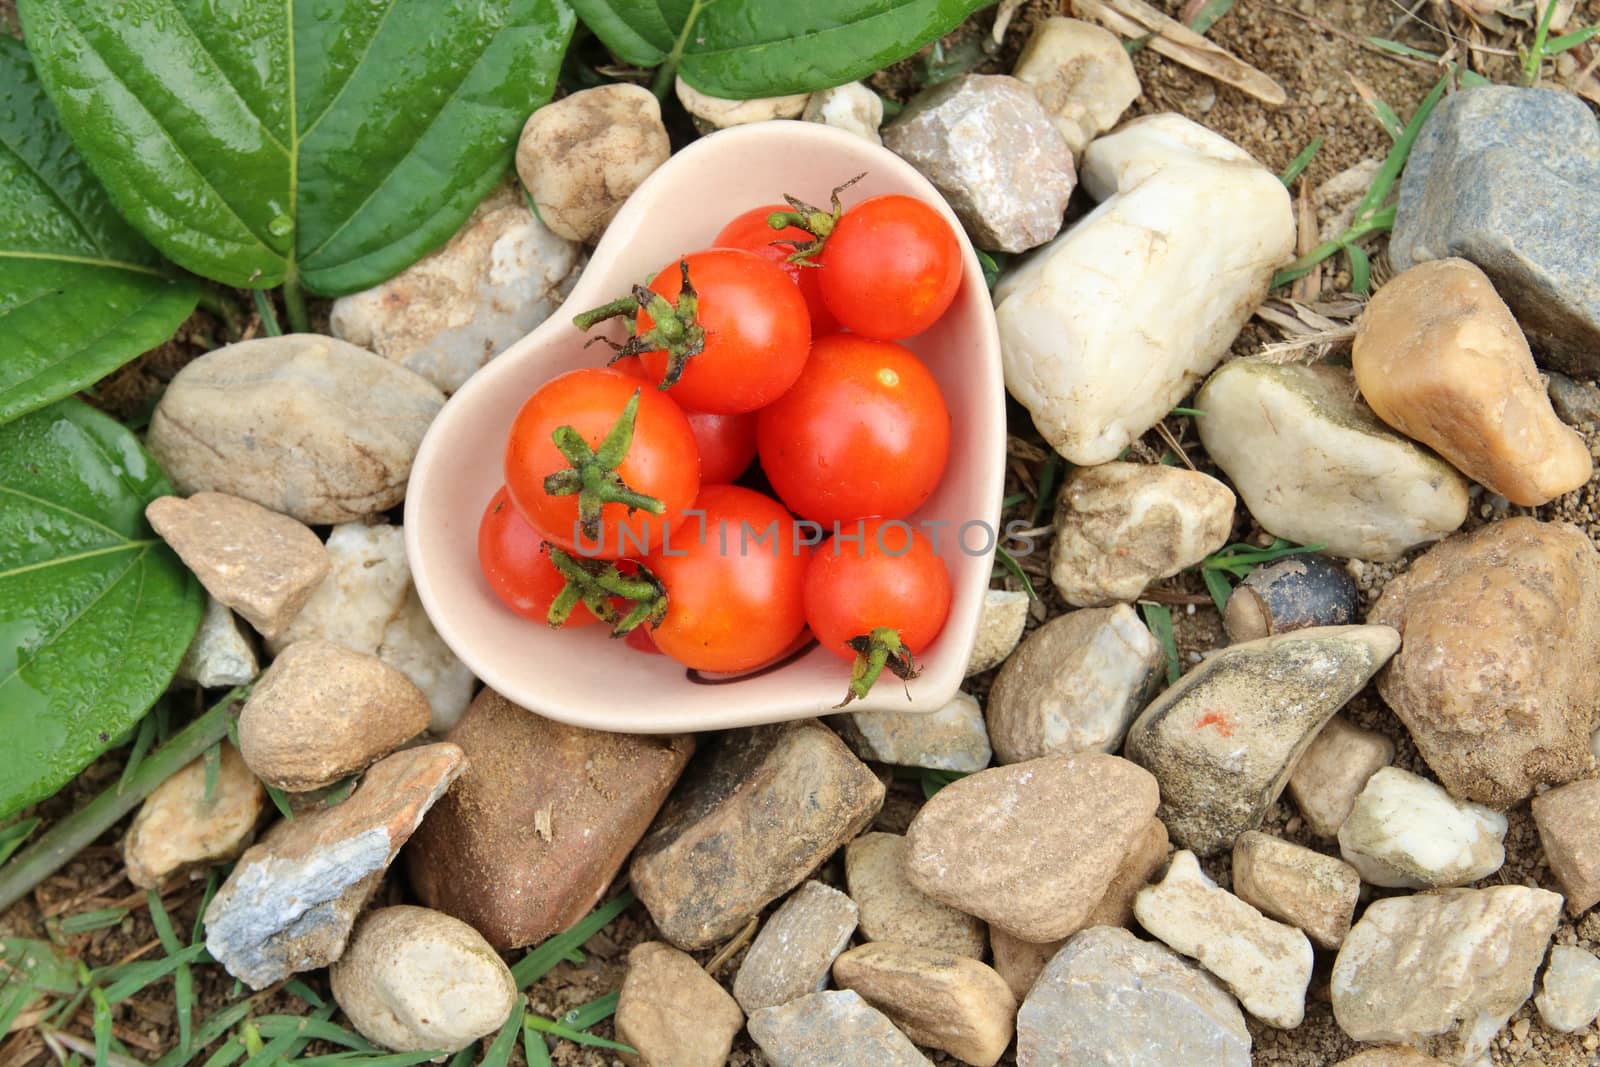 The little red tomatos are  in ceramic bowl.